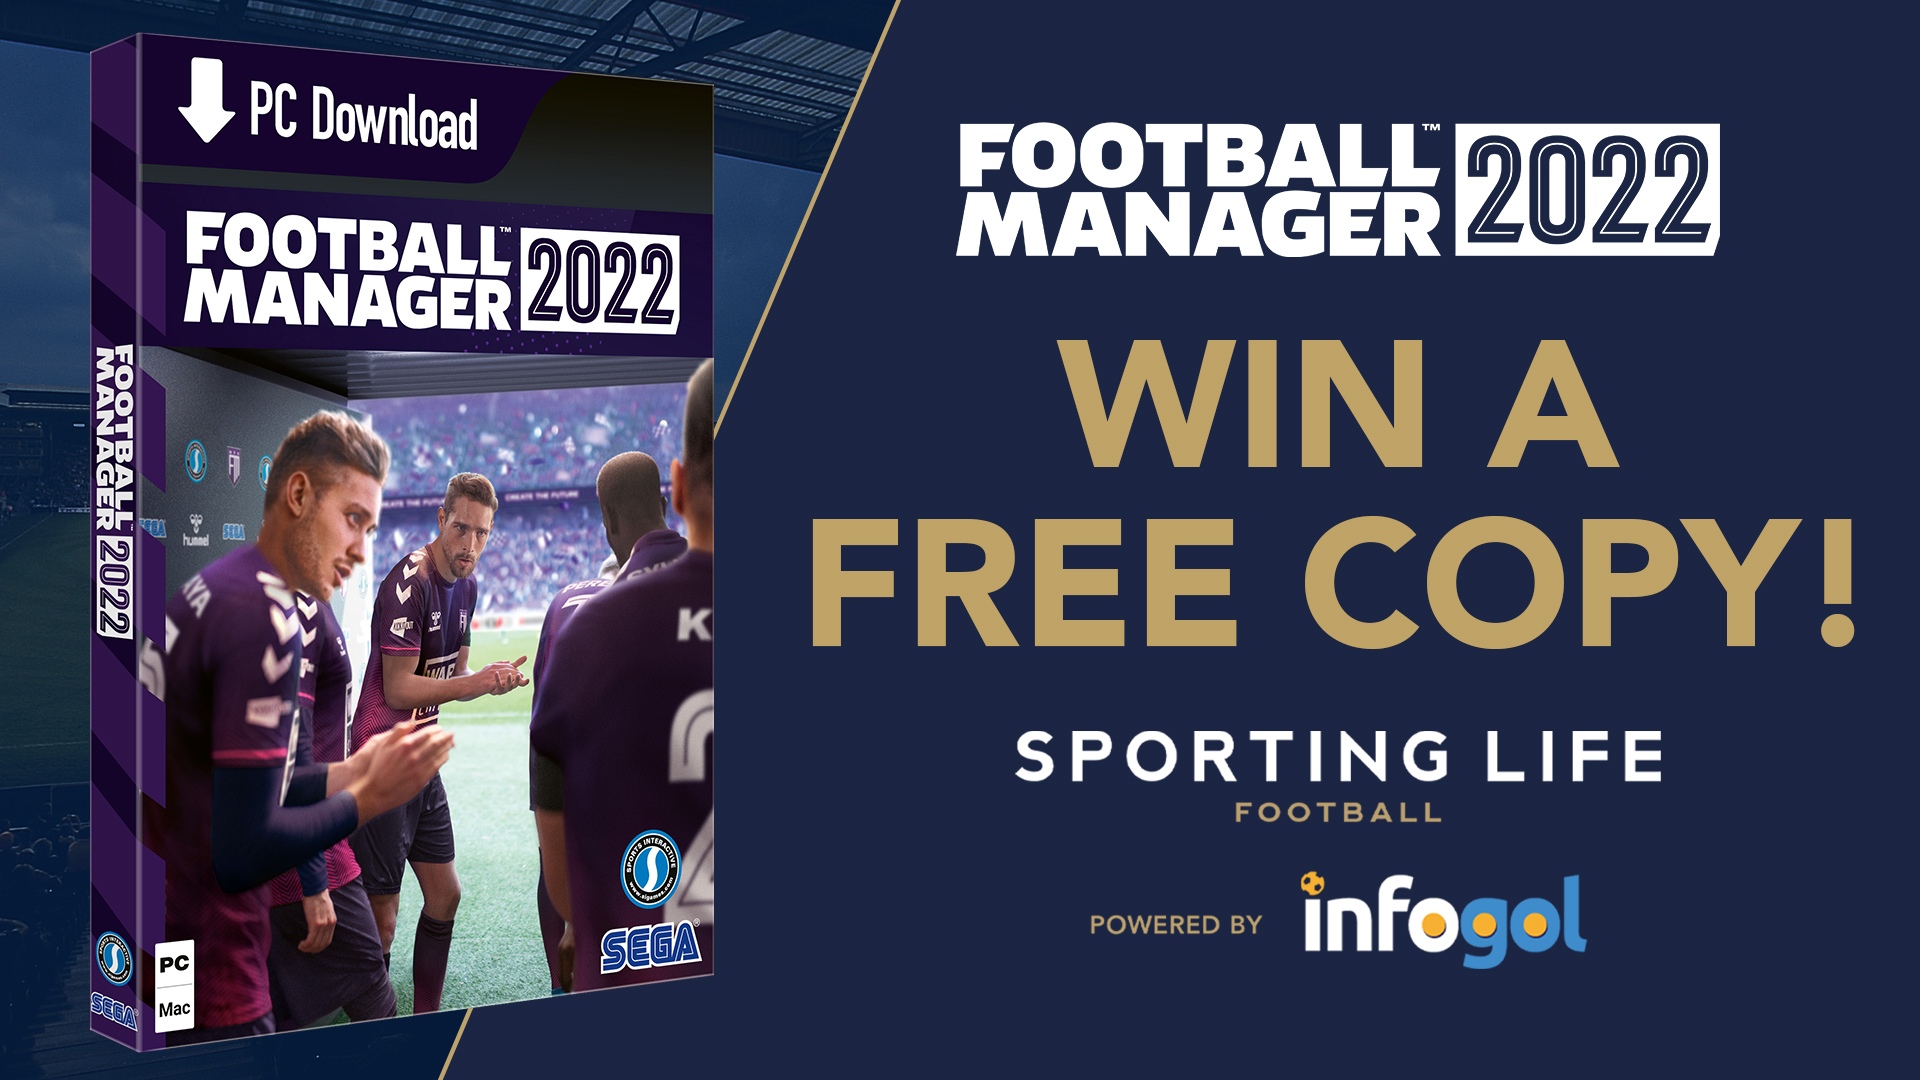 Football Manager 2022 competition: Win a free copy via Sporting Life  Football's Twitter and Facebook pages